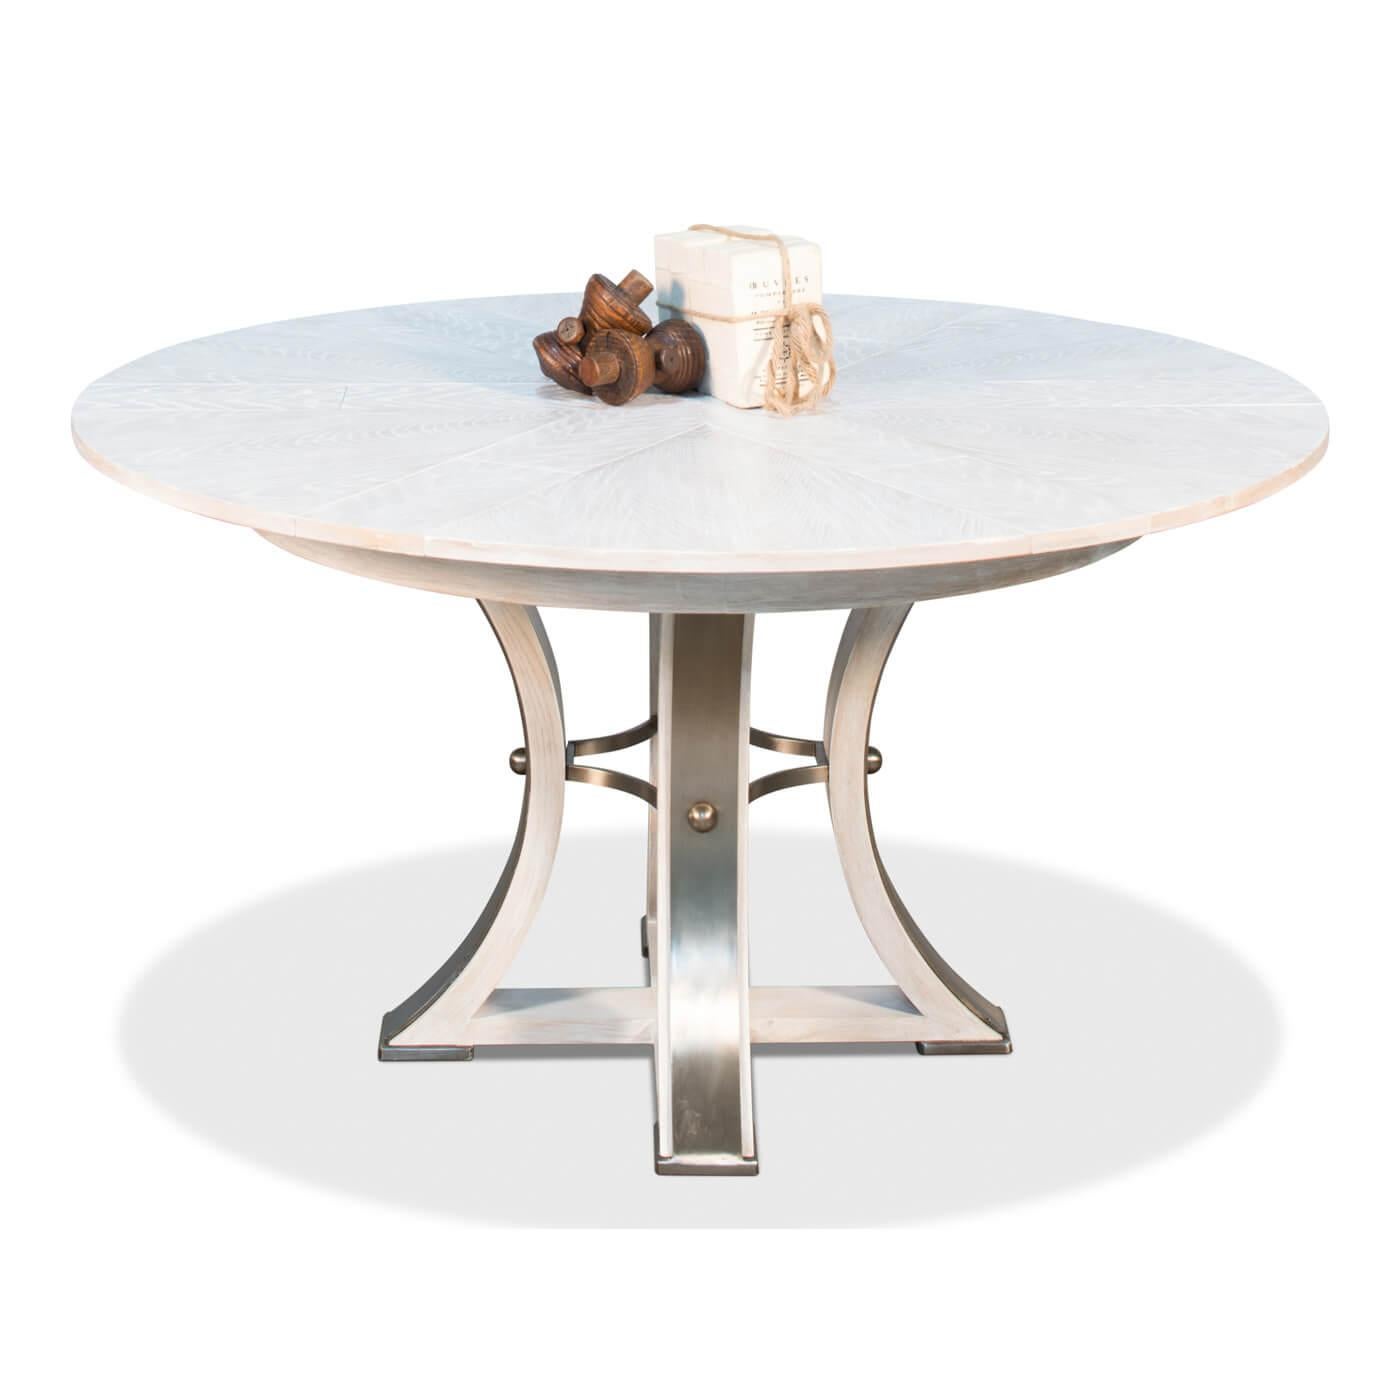 Contemporary Industrial Style Round Extension Dining Table